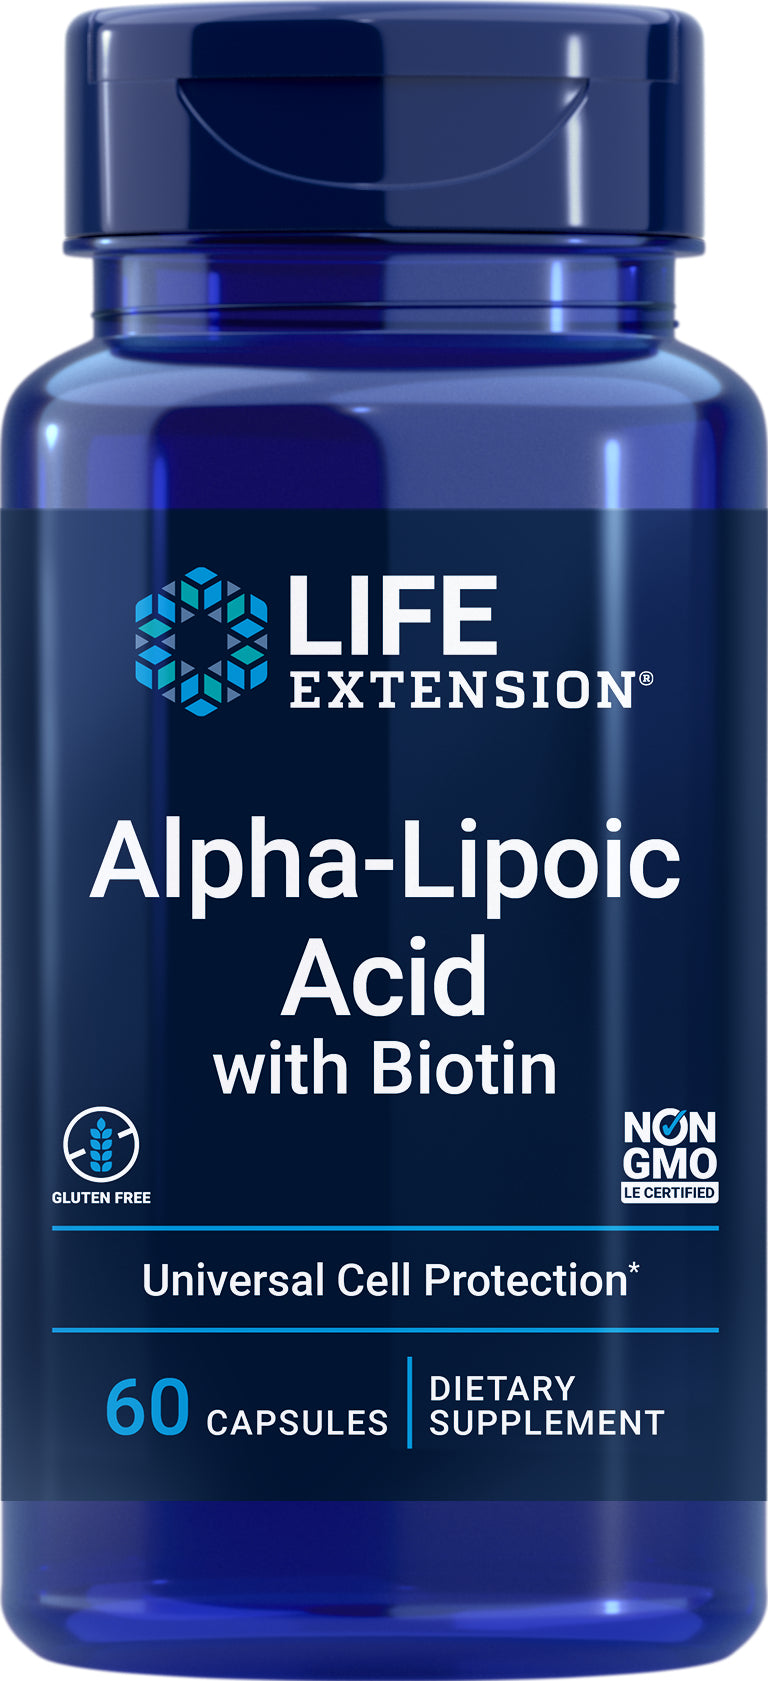 Alpha-Lipoic Acid with Biotin 60 Caps by Life Extension